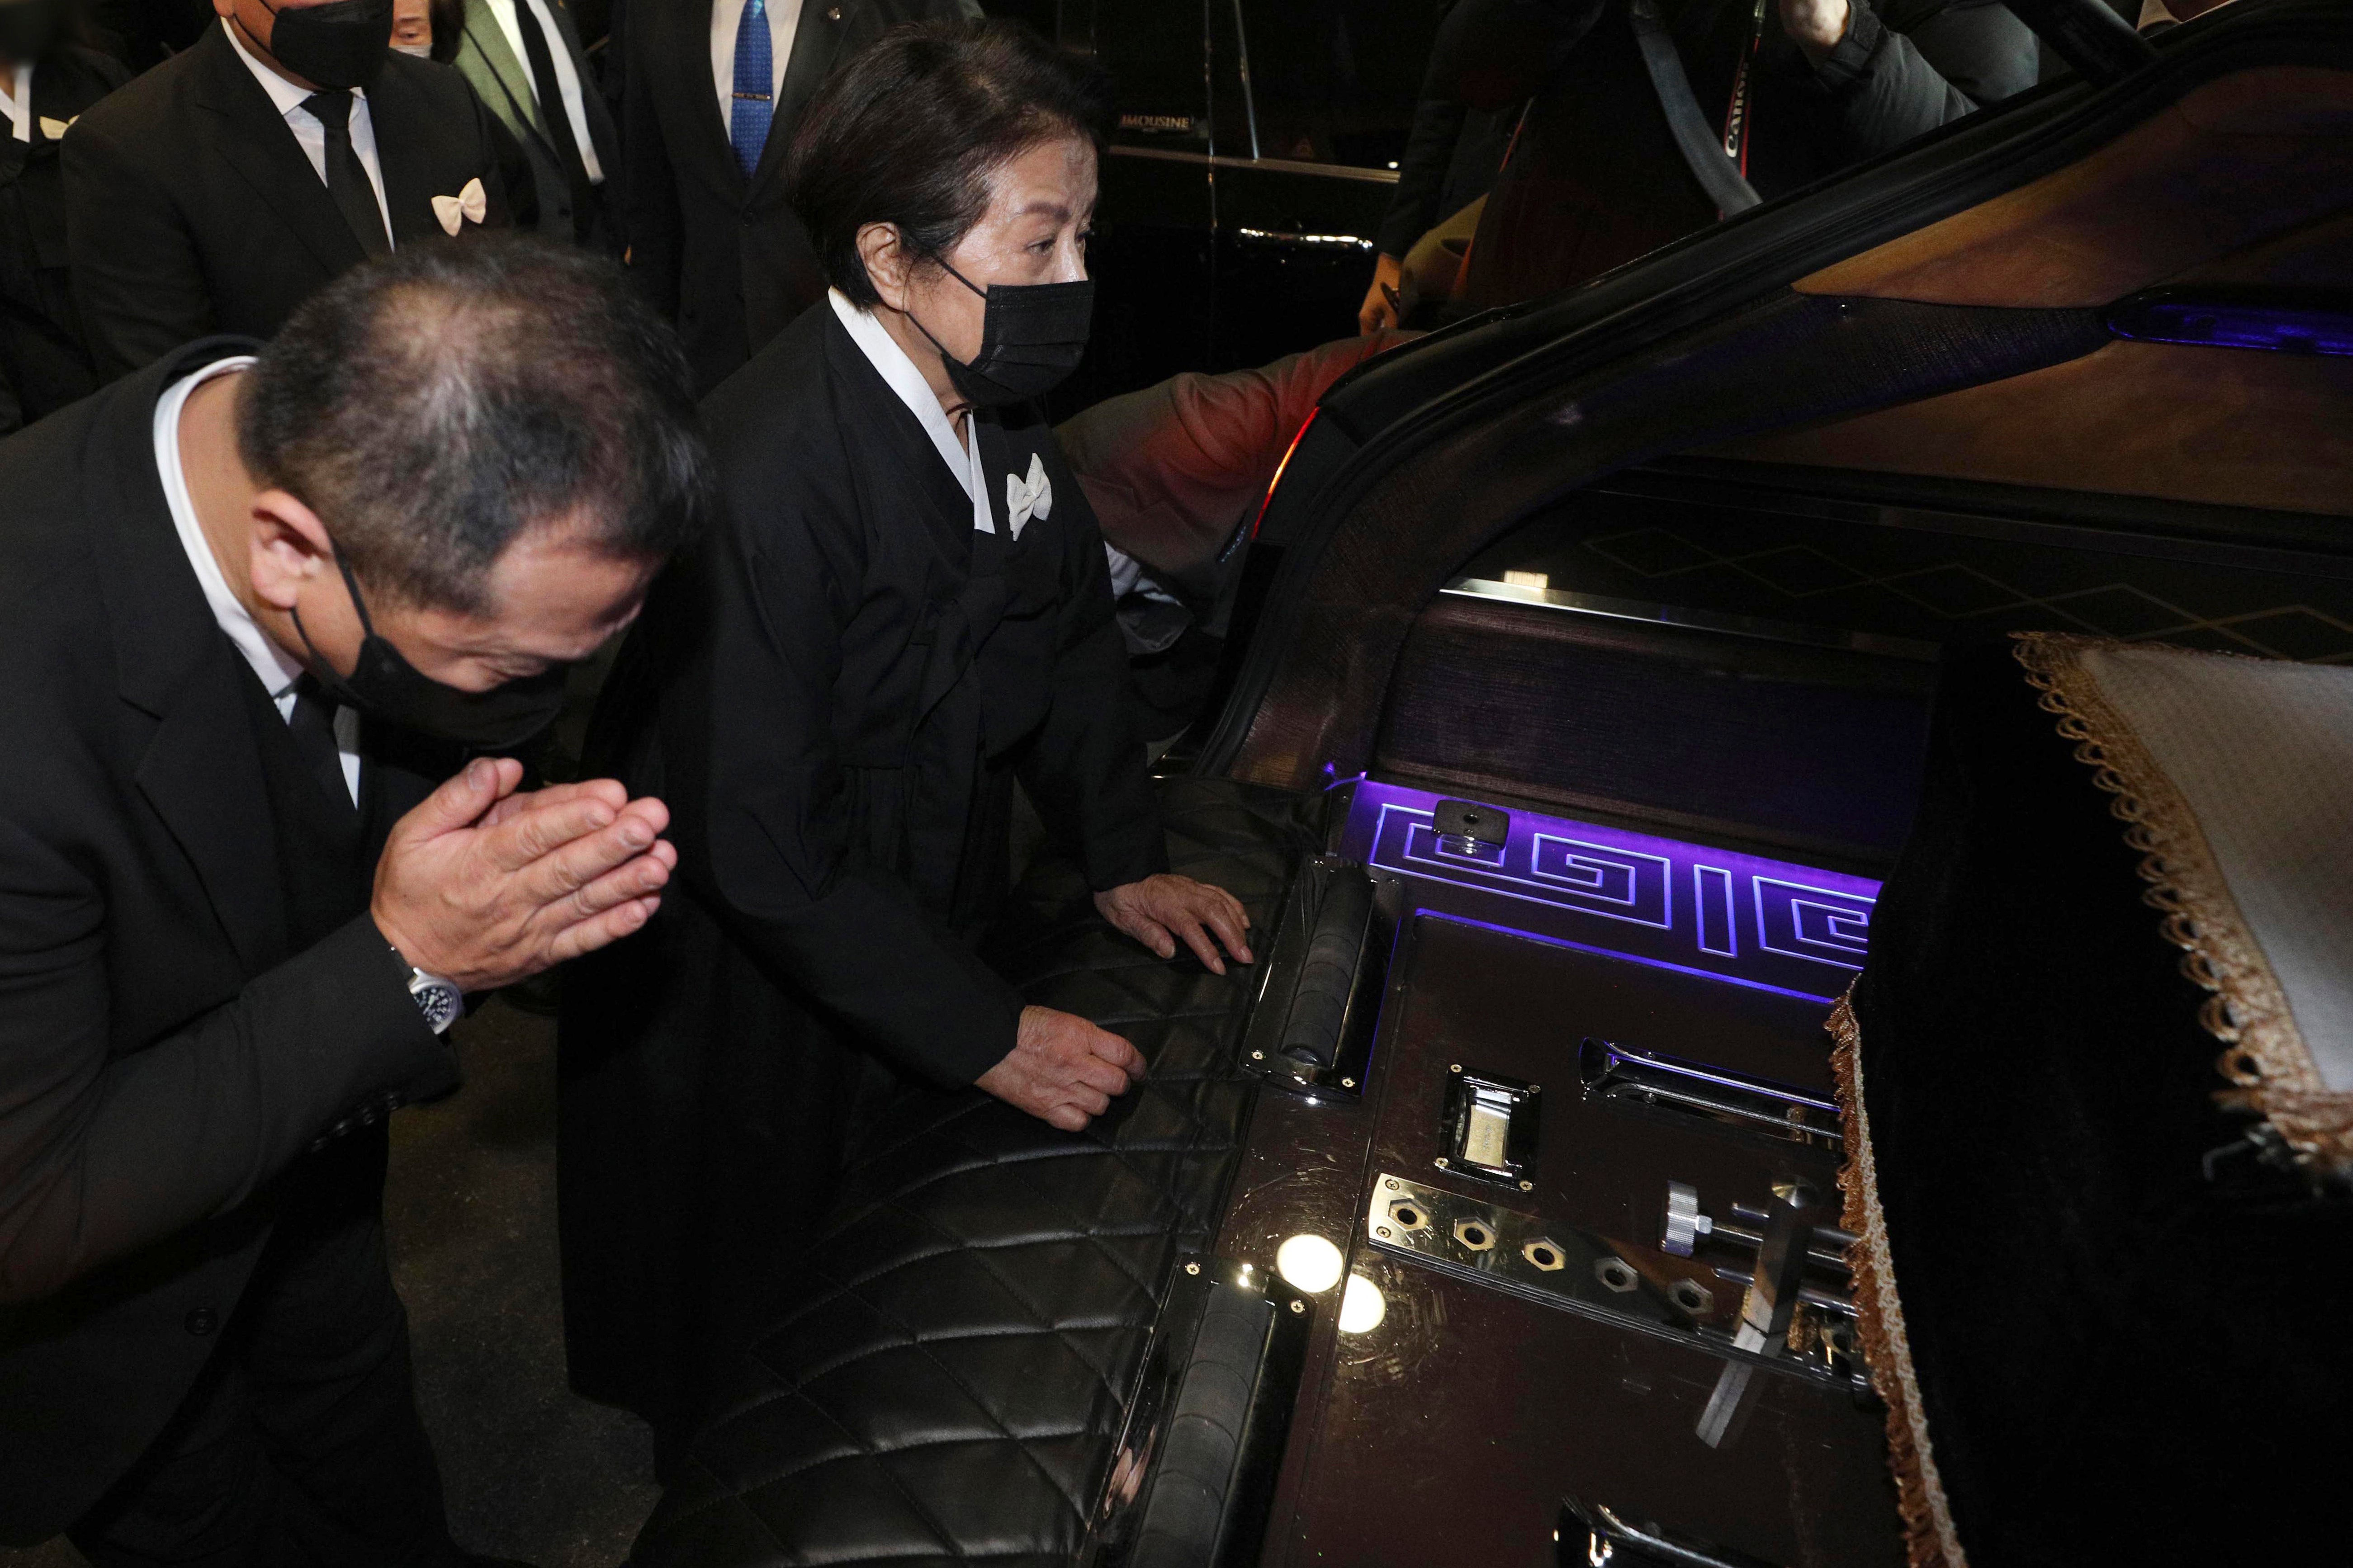 Lee Soon-ja, second from right, the wife of the late former South Korean President Chun Doo-hwan, watches the coffin containing the body of her husband at a funeral hall in Seoul, South Korea on 27 November 2021